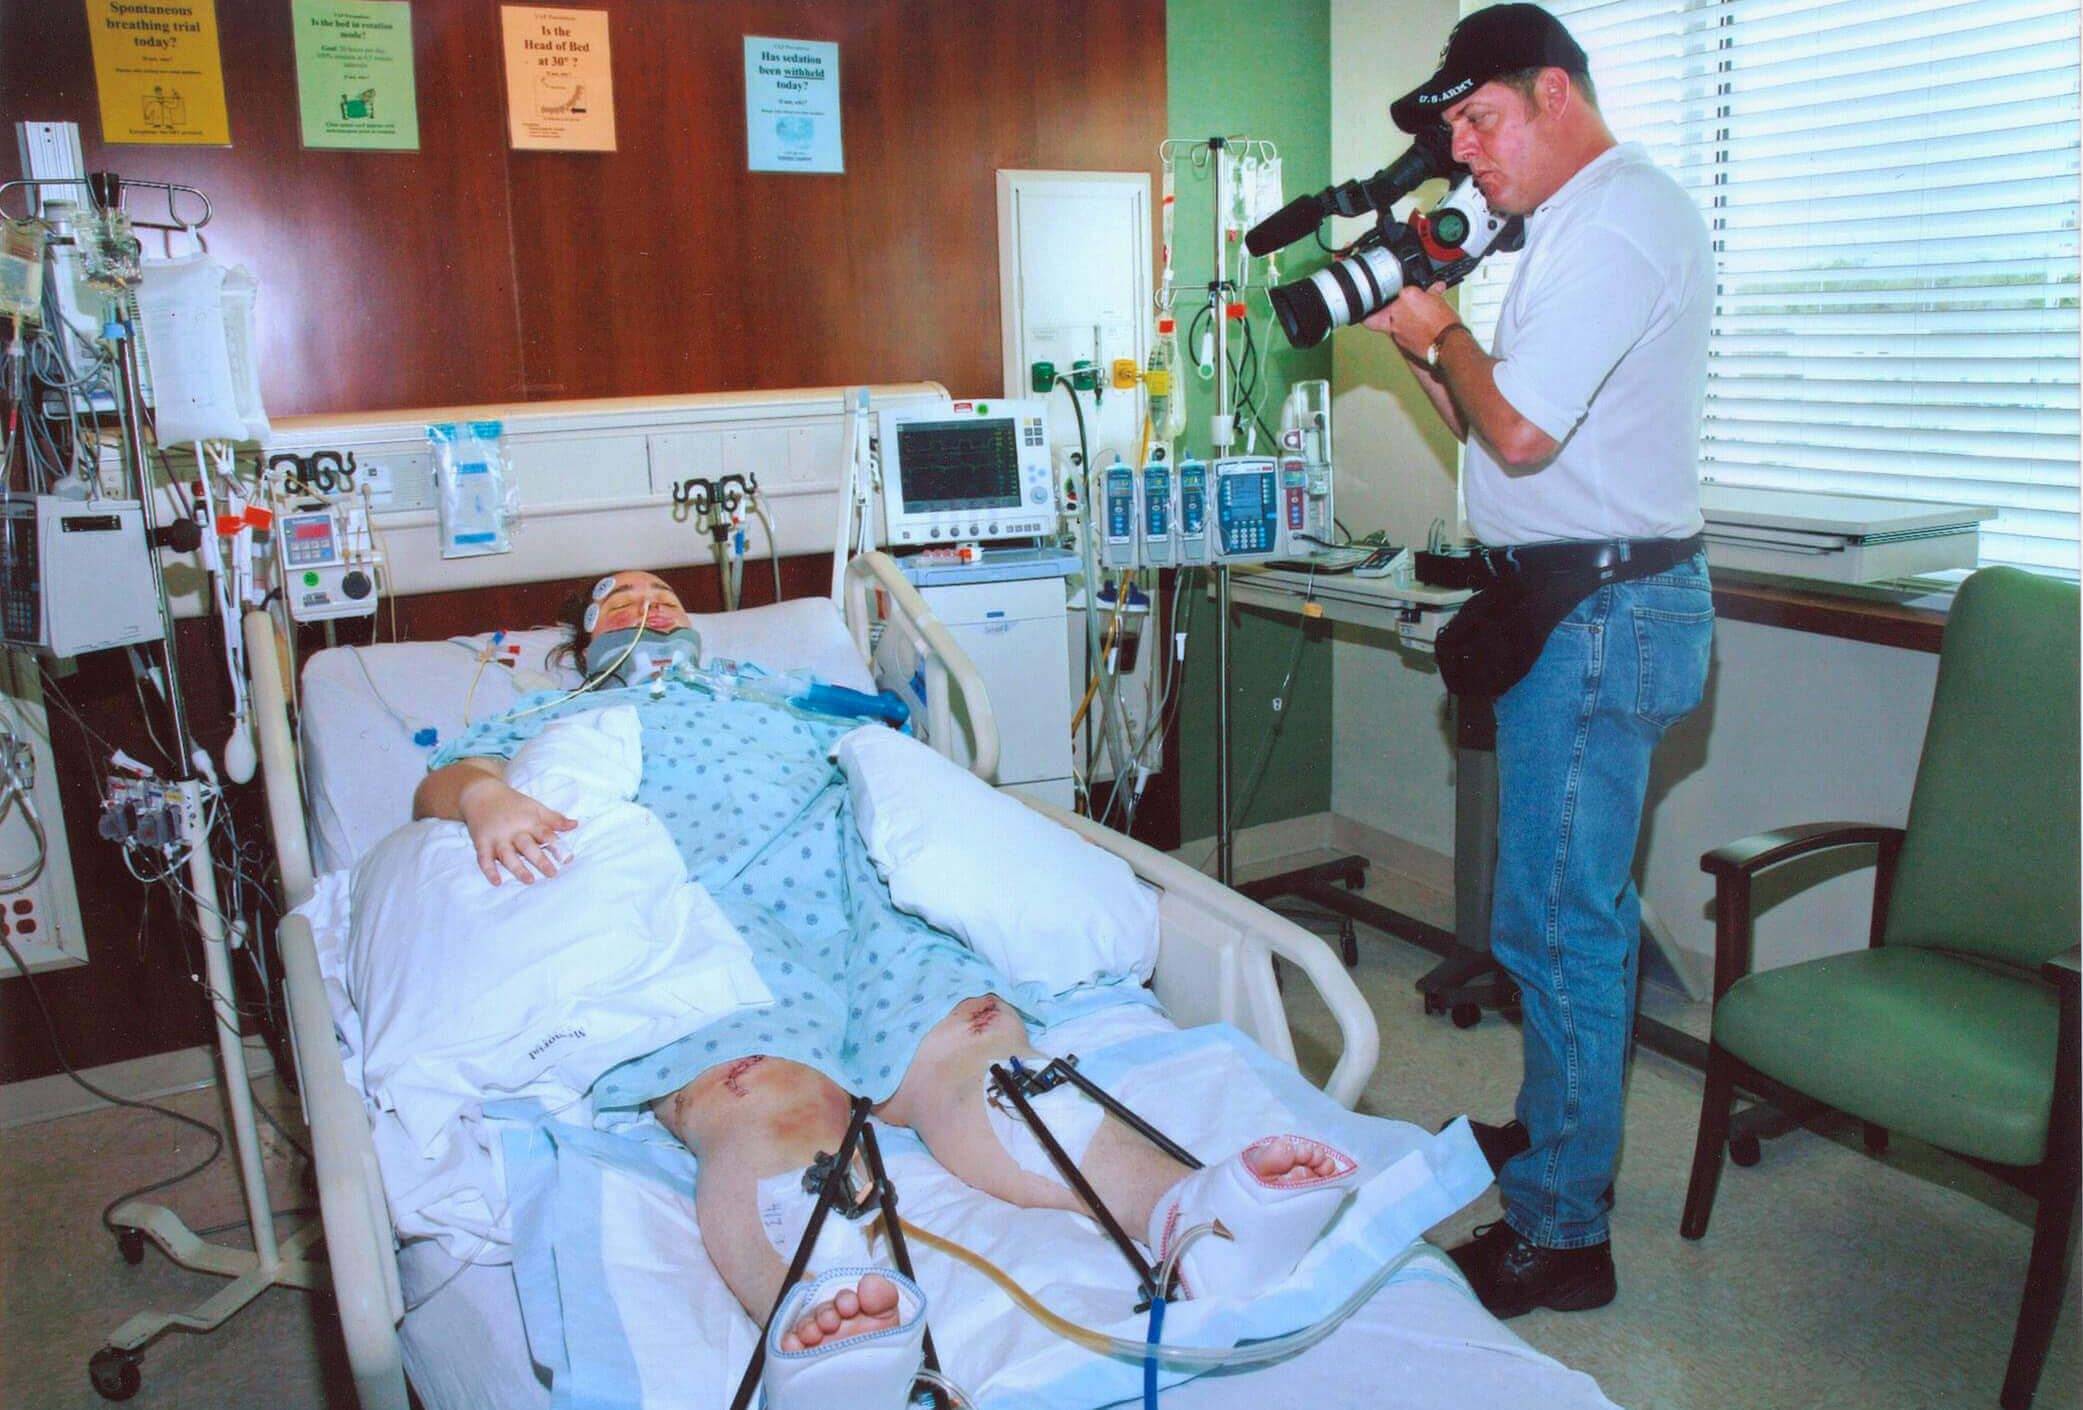 James filming Day in My Life video at hospital